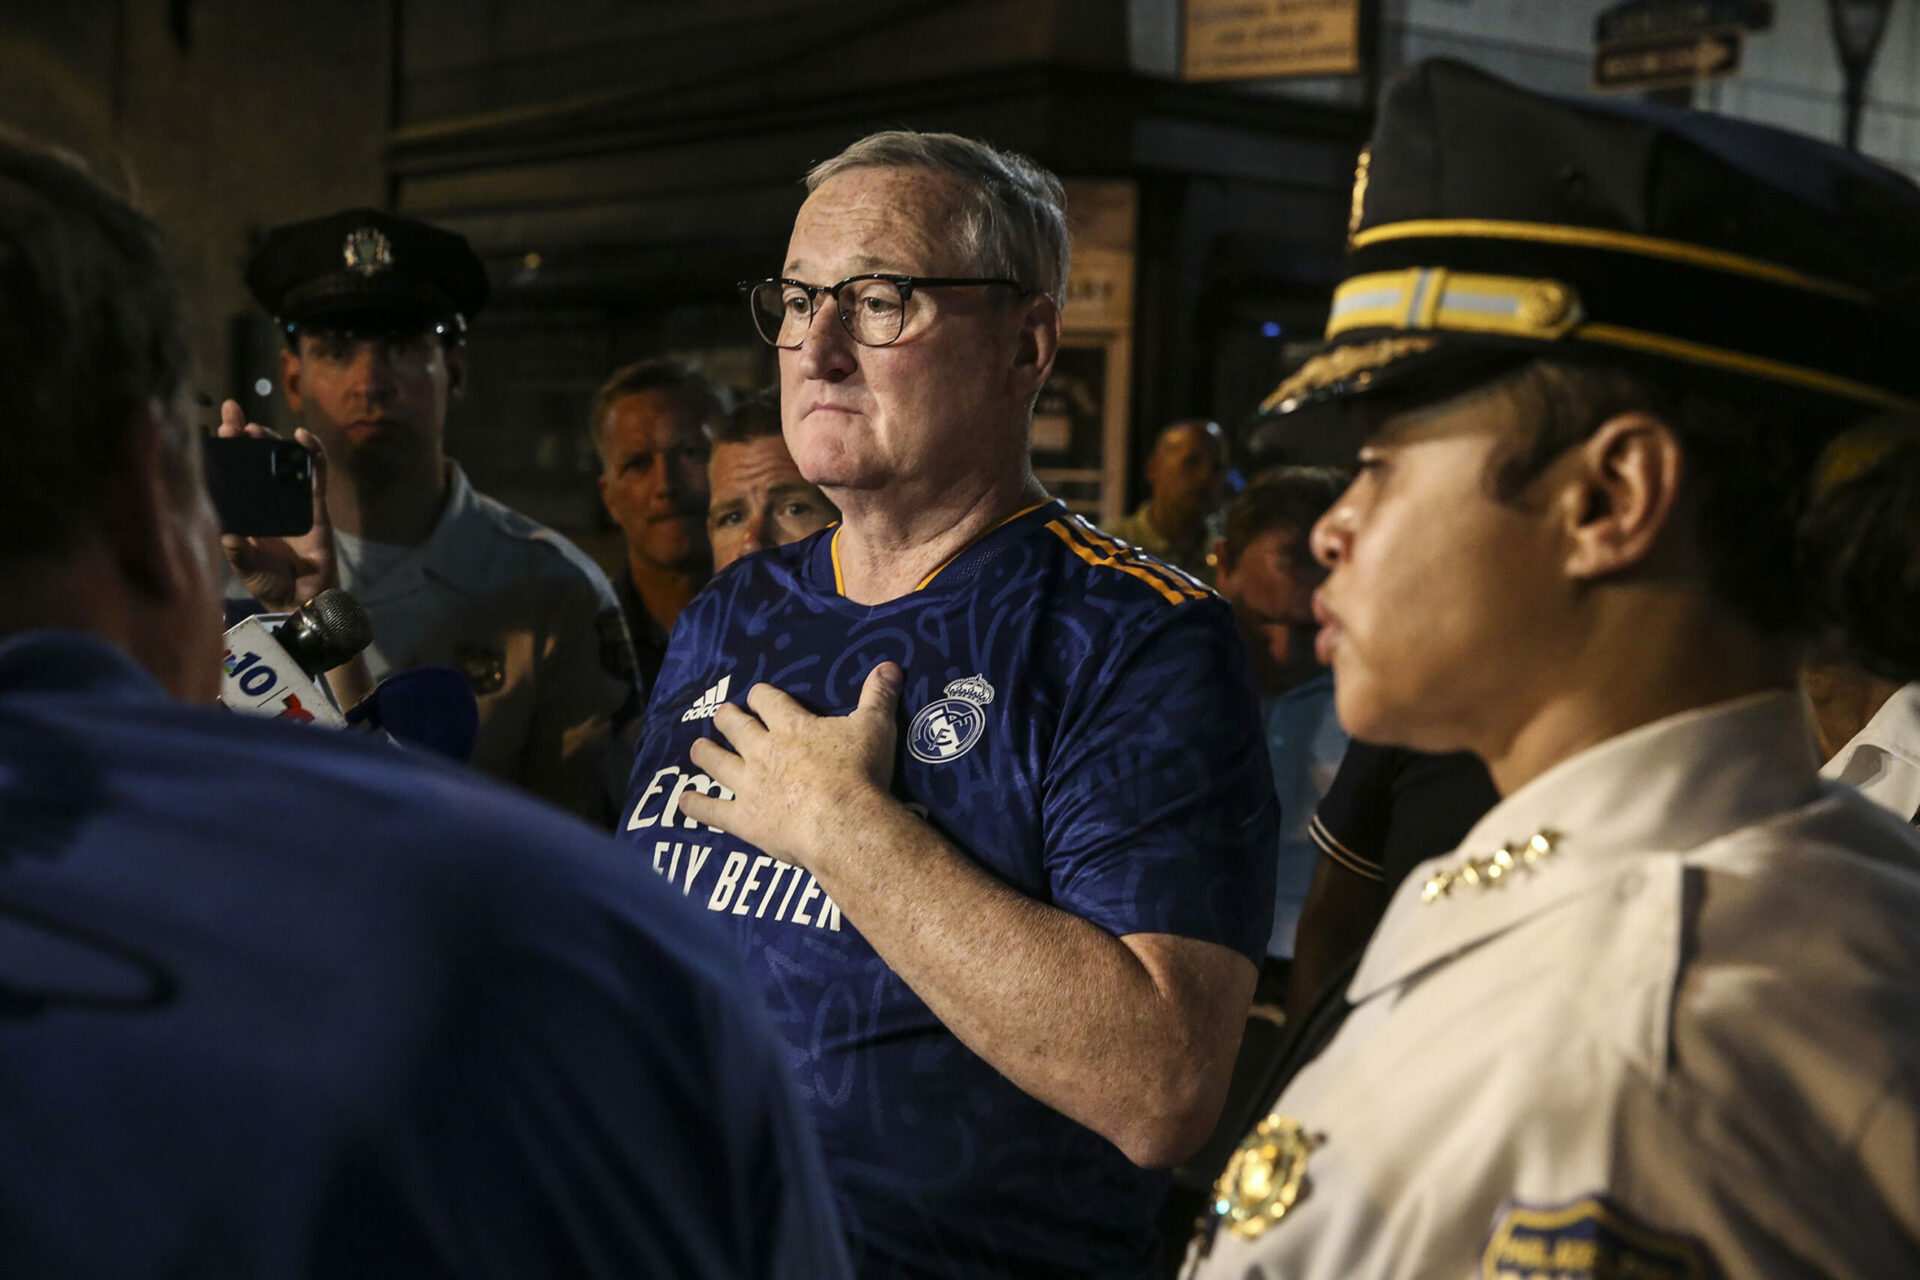 After police are shot, Philly mayor says he’ll ‘be happy’ when he’s not mayor anymore